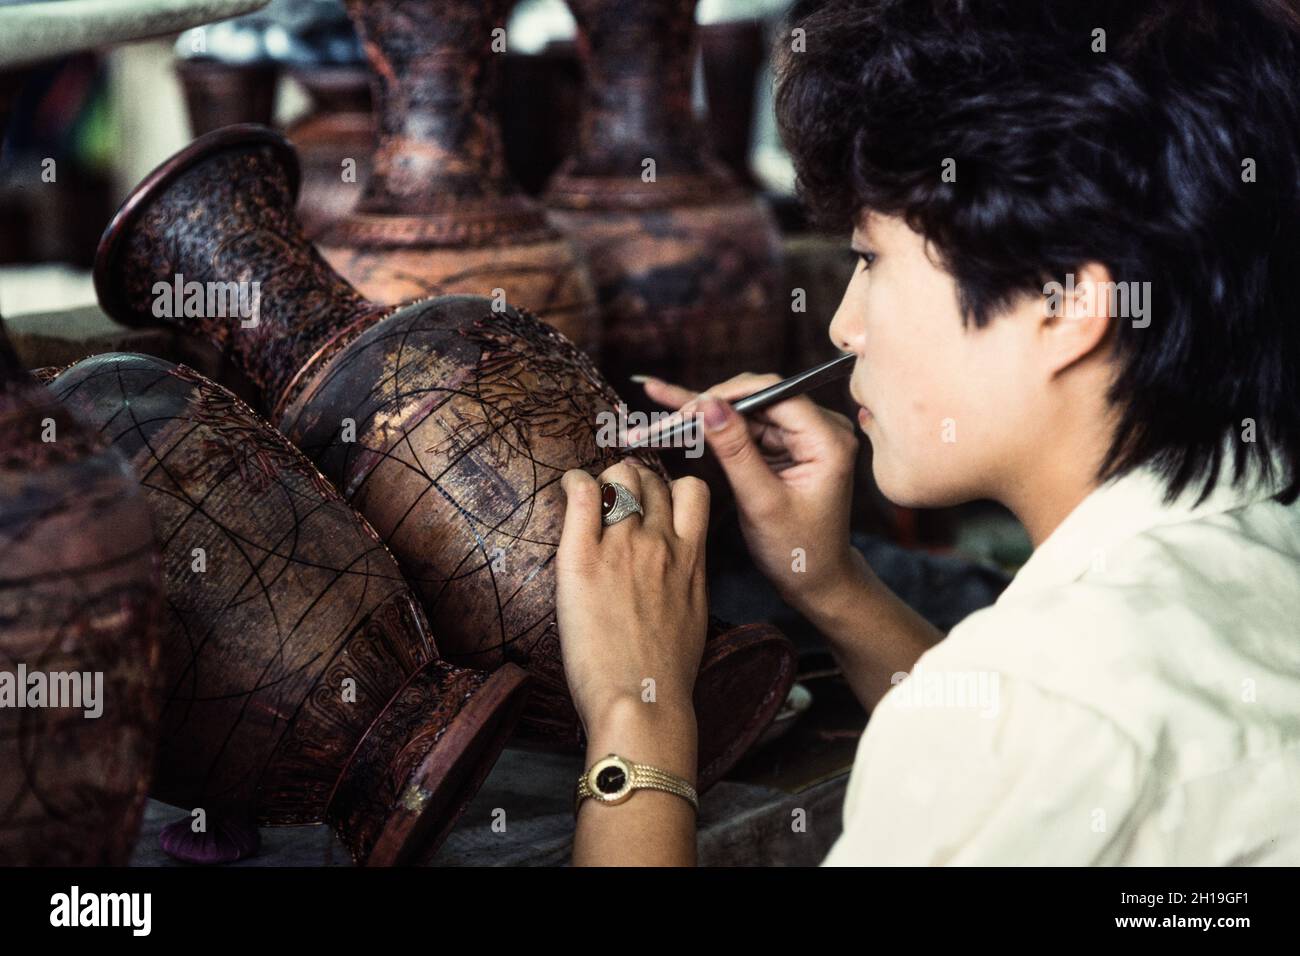 An artisan attaches cloisons or wire strip to make the design for a cloissone vase in a workshop in Beijing, China. Stock Photo